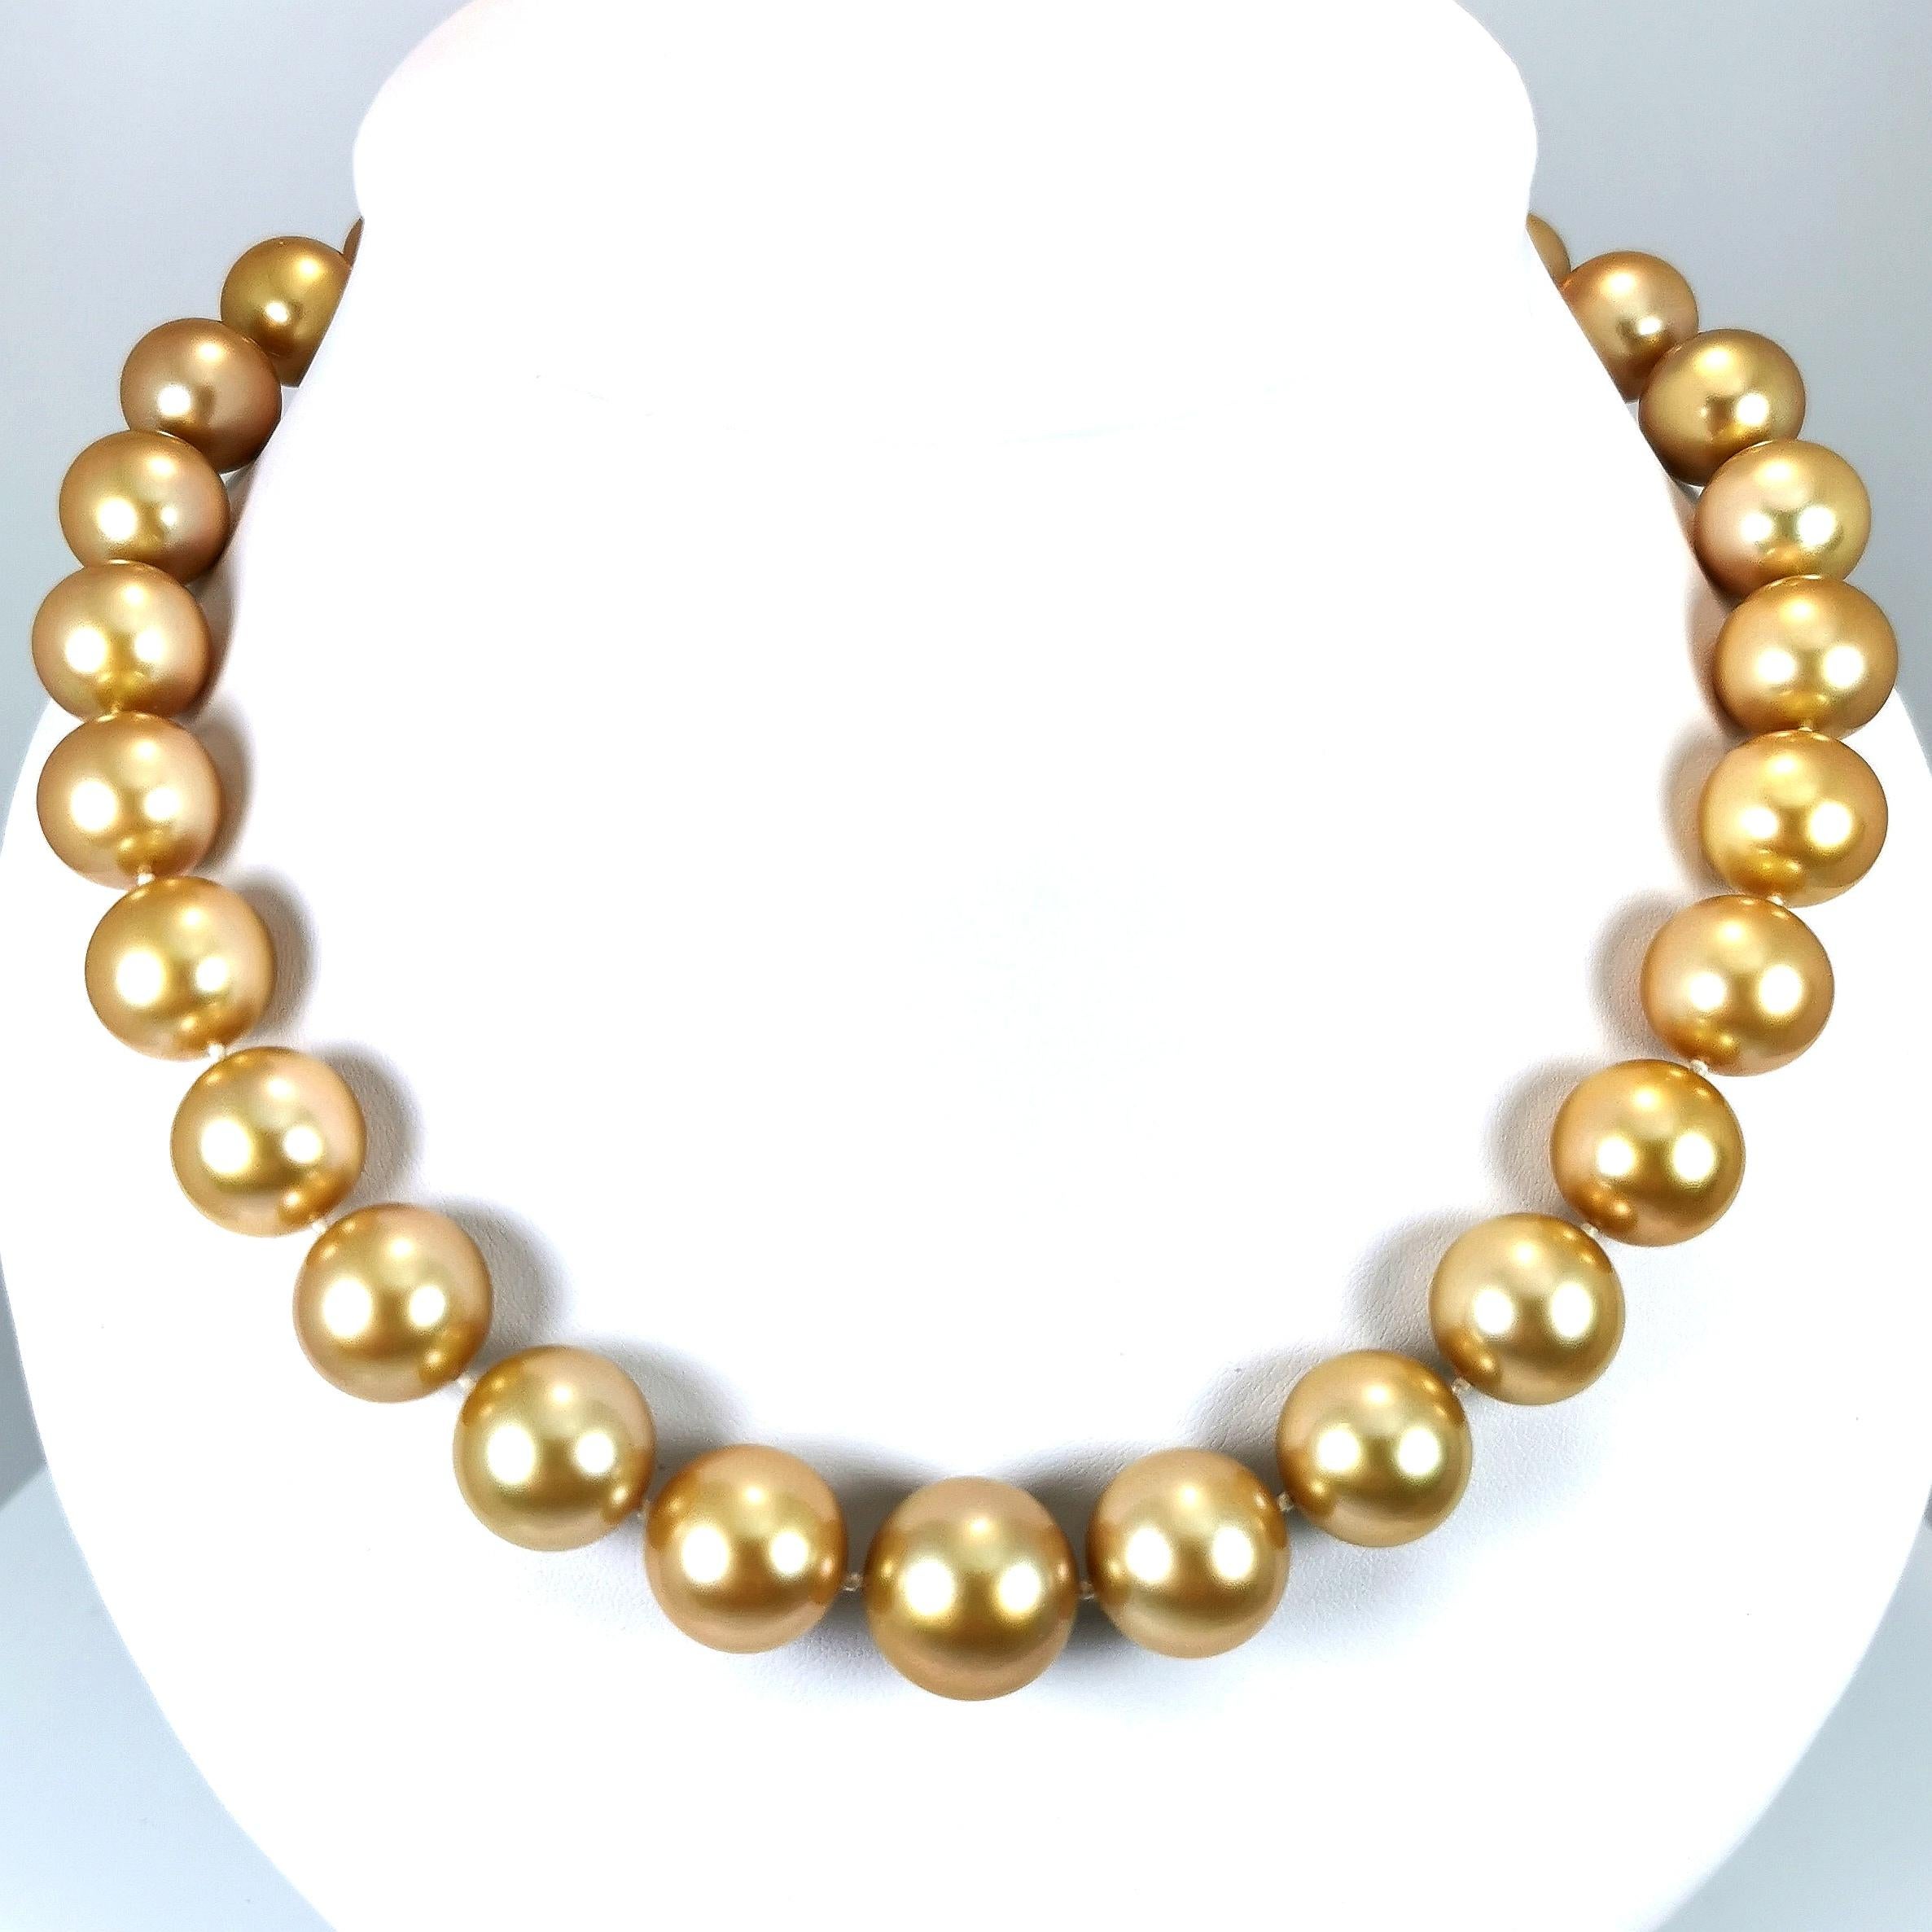 Exceptional and Rare necklace australian Southsea cultured pearls perfect round shape - Sizes Ø 14 x 16,1 MM natural deep Golden colour, clean surface. Mounted on silk thread with knots between each pearl and a magnificent Ø 15mm yellow gold 18K